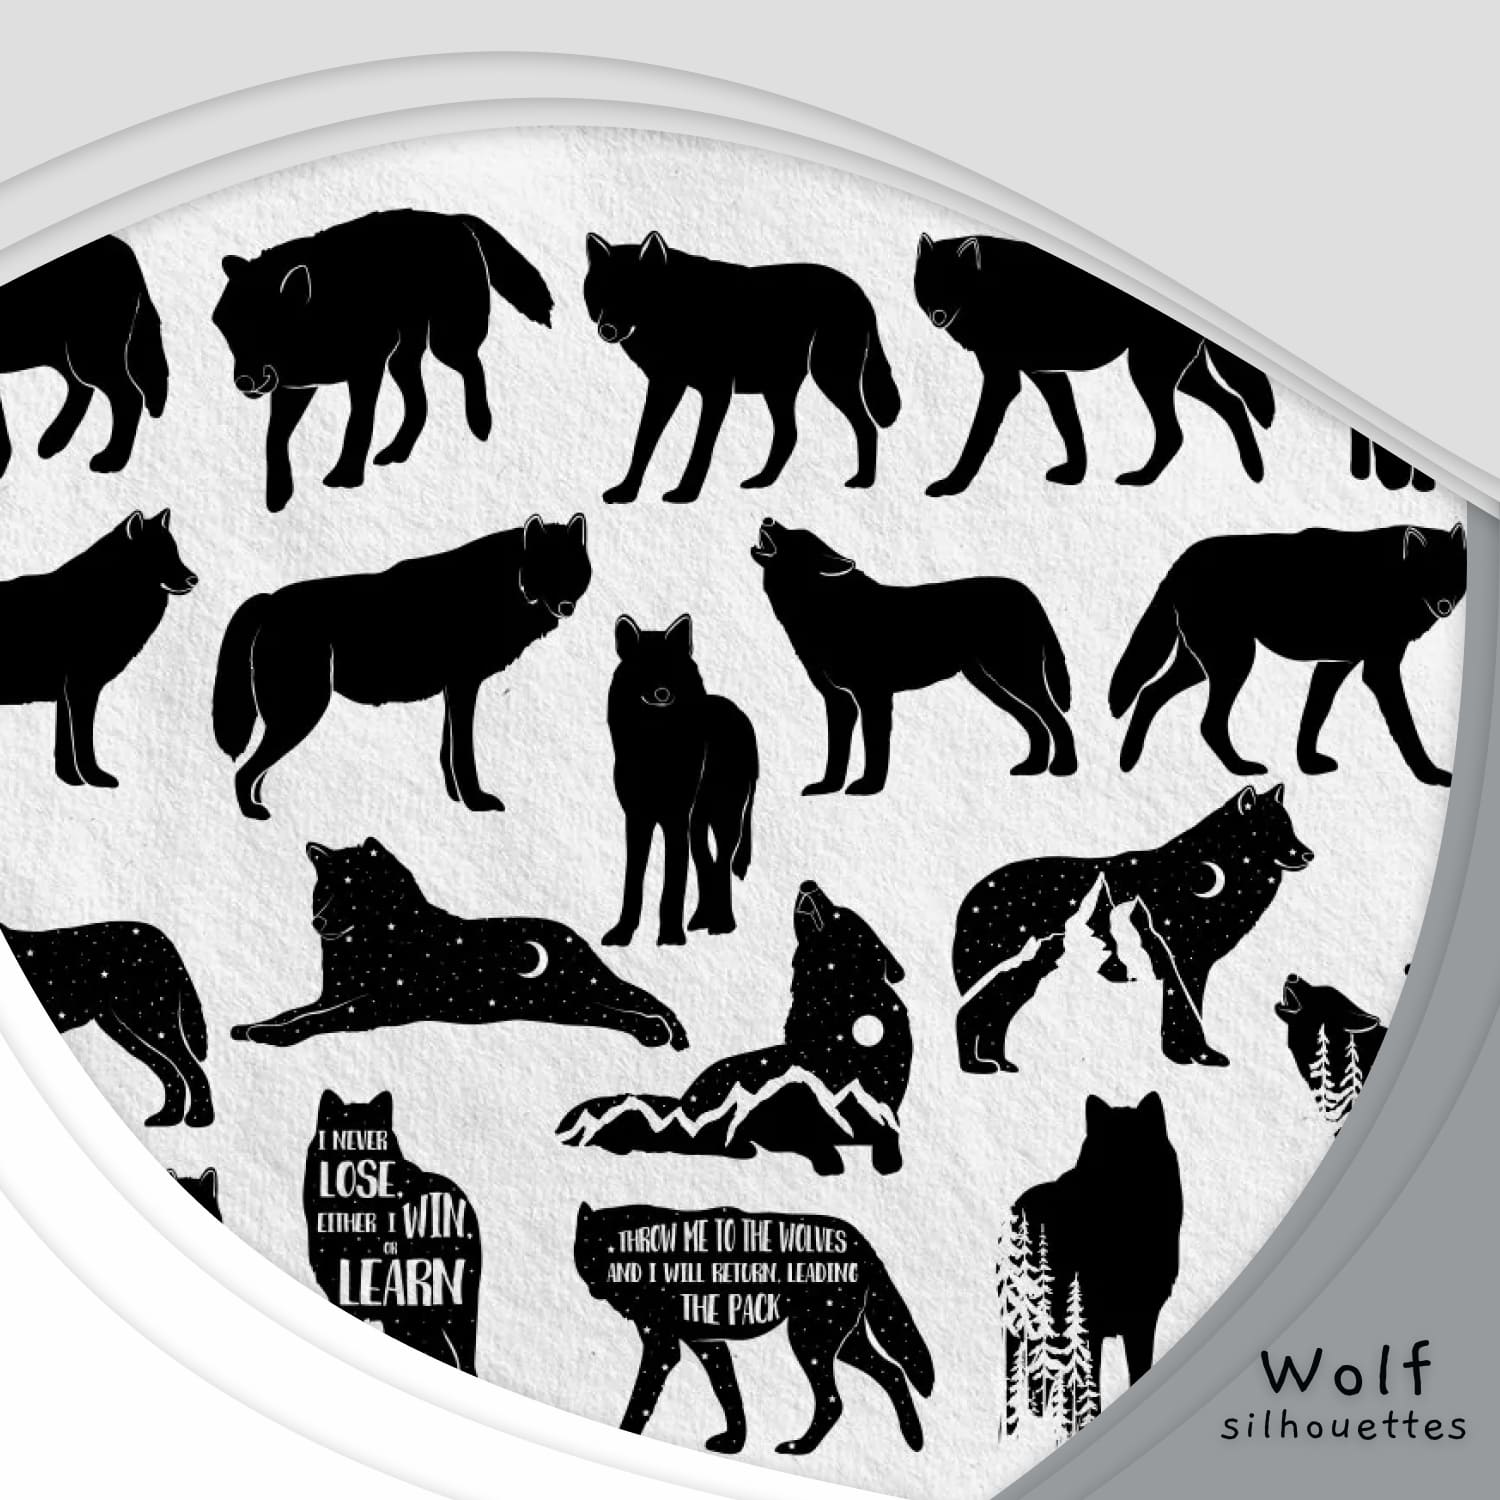 Wolf silhouettes - main image preview.